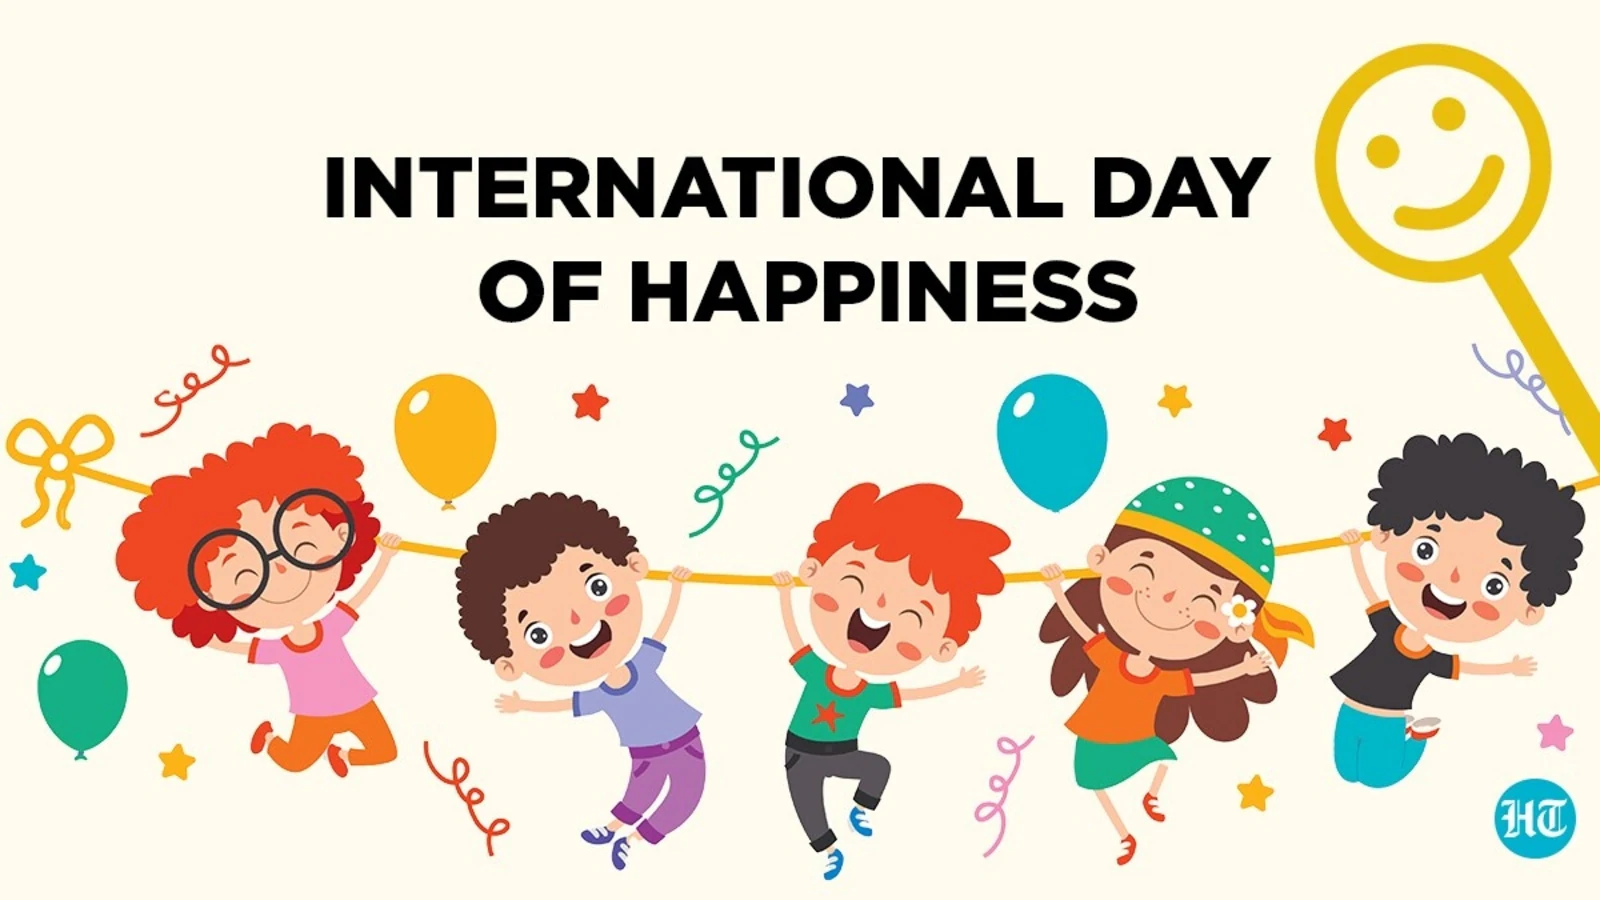 10 things to know about International Day of Happiness